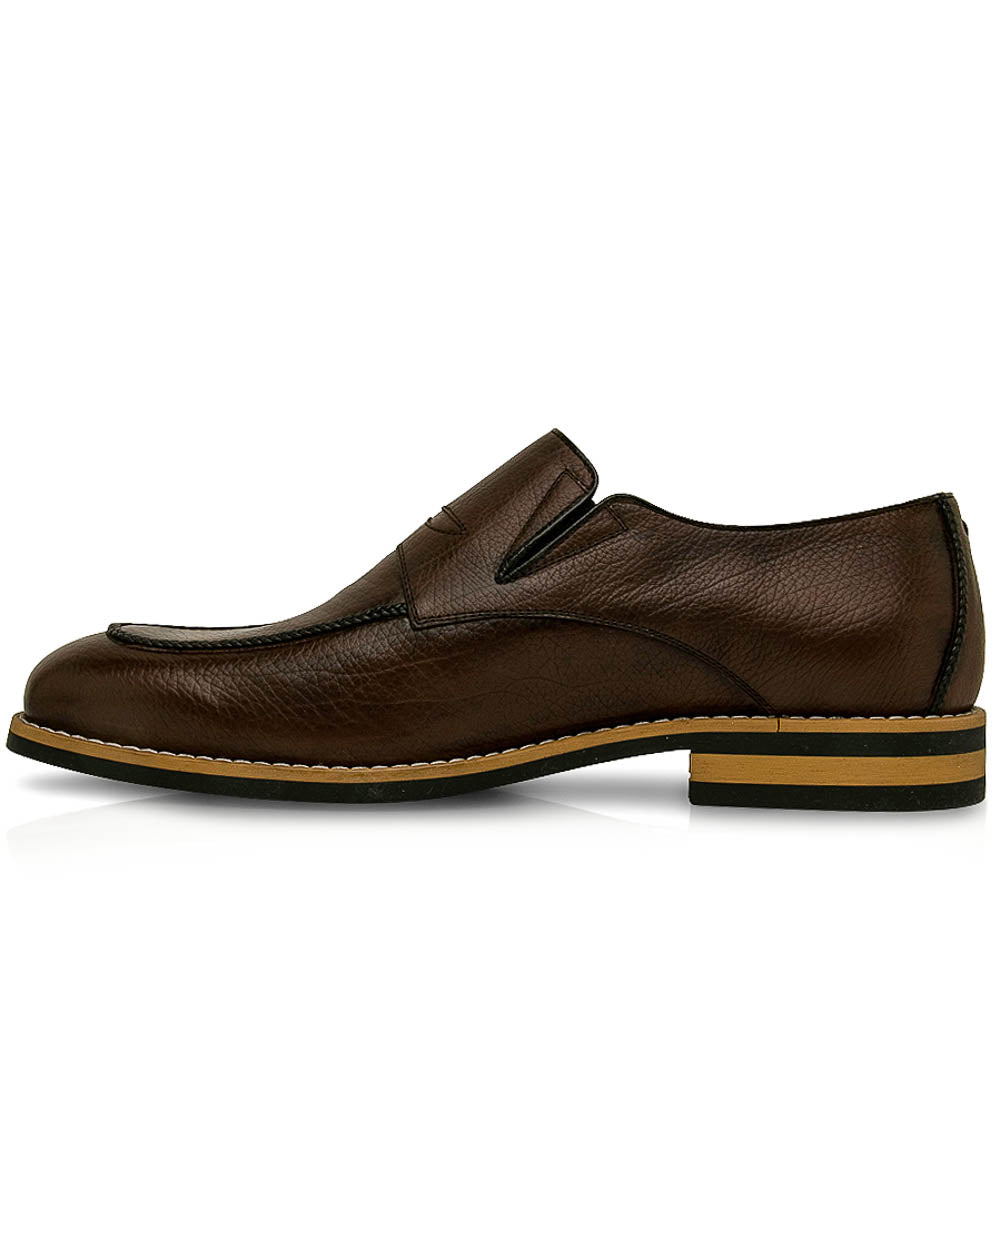 Chocolate Monaco Leather Penny Loafer